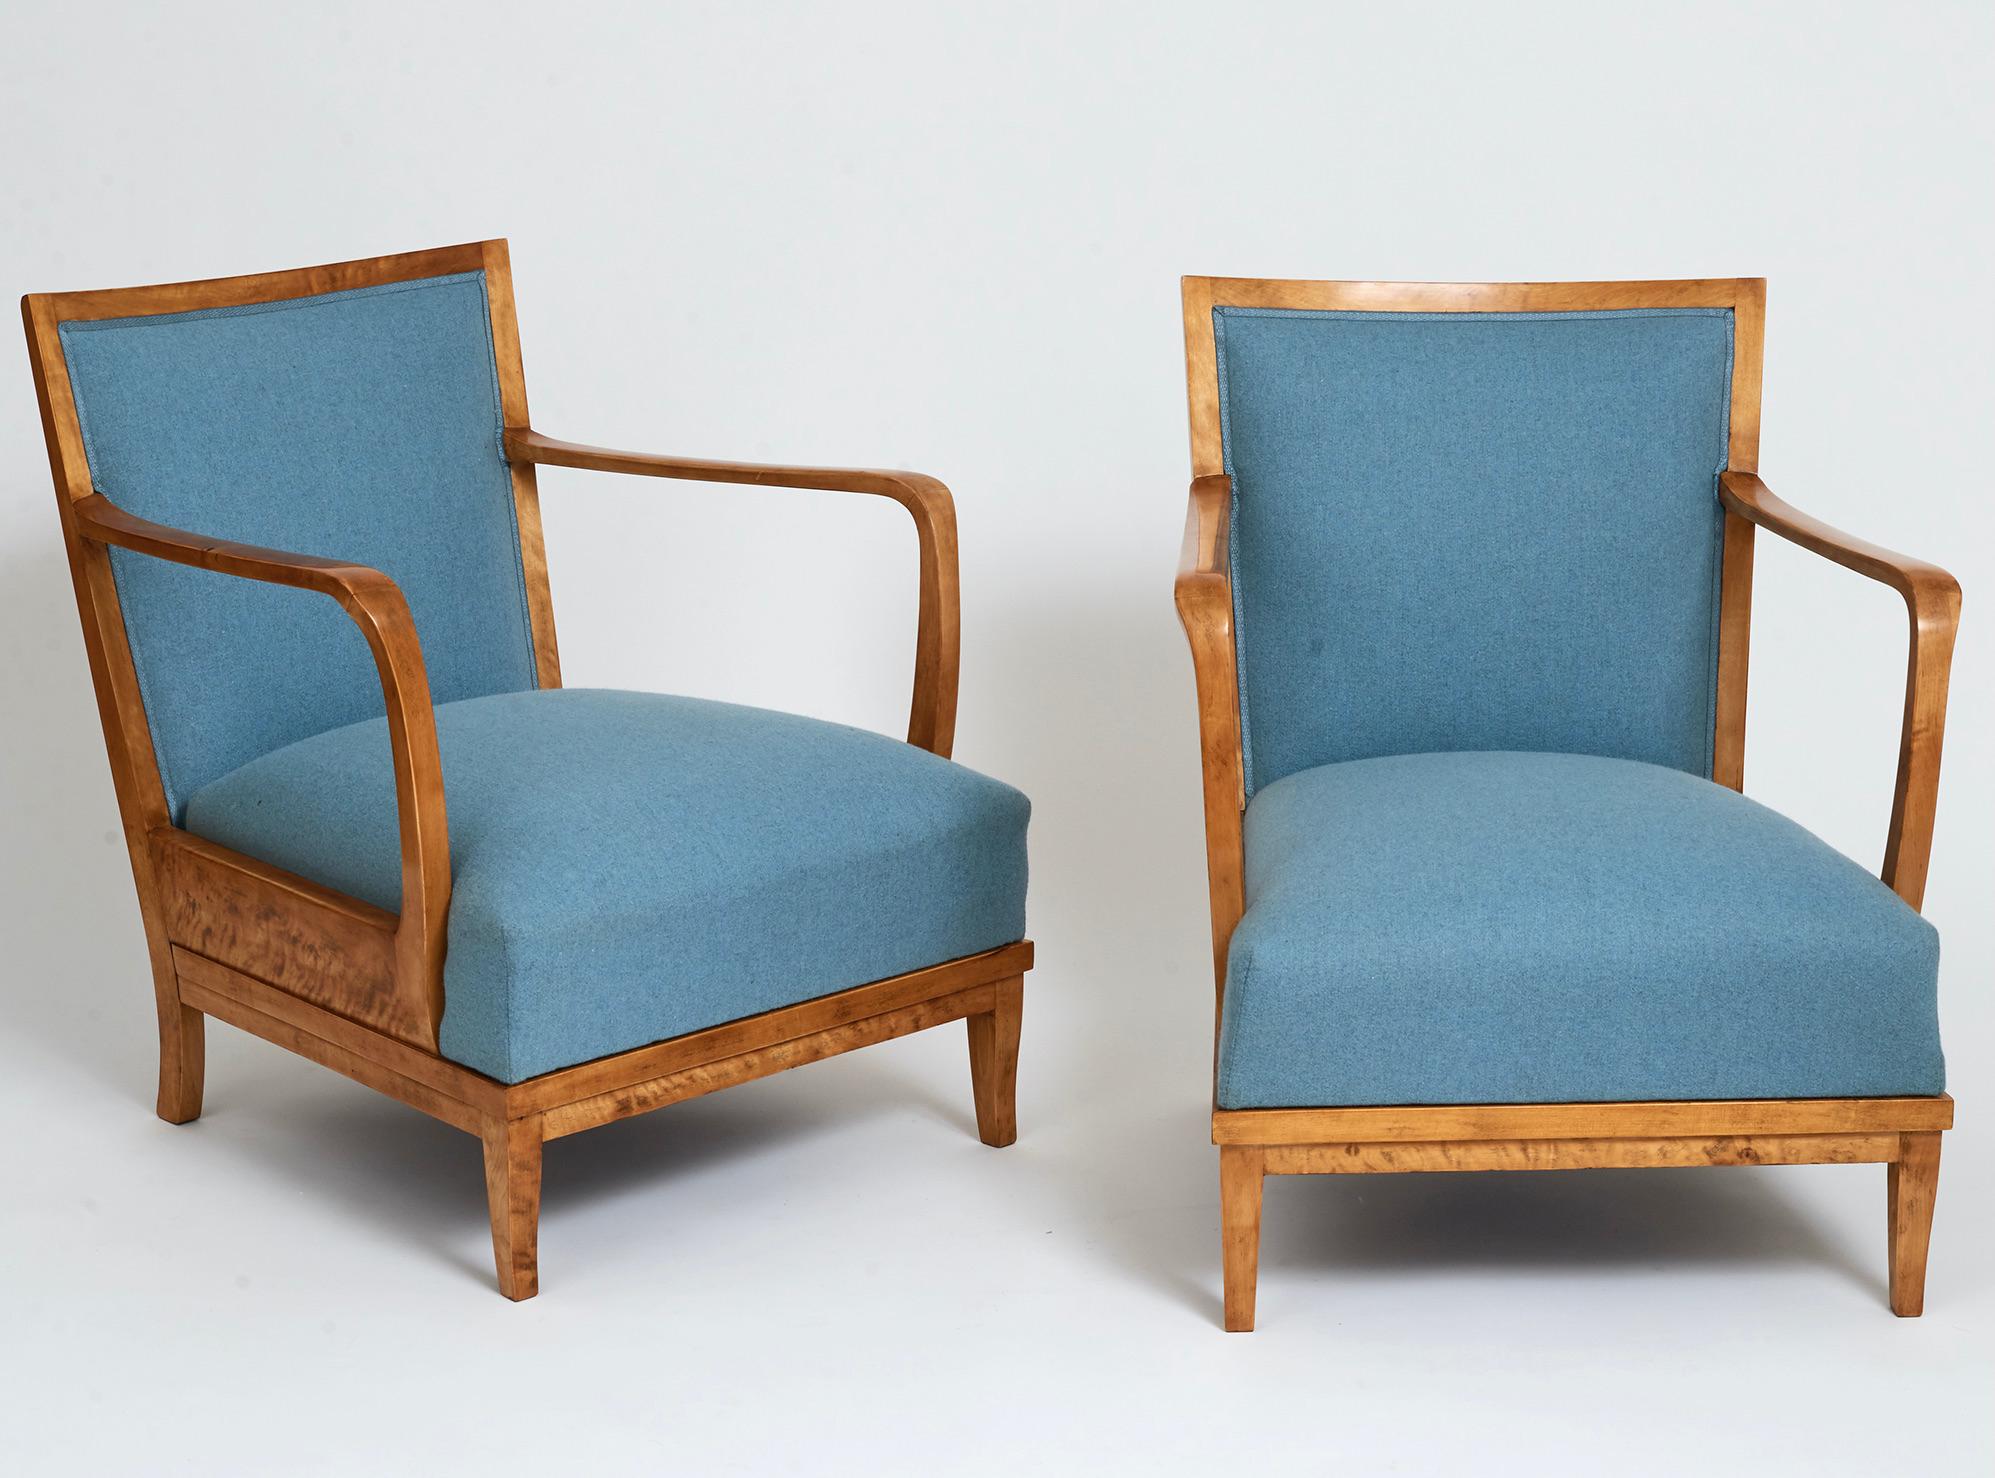 A pair of Swedish grace Birchwood open armchairs, circa 1940s, each with a rectangular upholstered backrest, generous curved open armrests, a drop-in upholstered seat raised on sabre legs.
New blue wool upholstery.

Measures: 58 cm arm